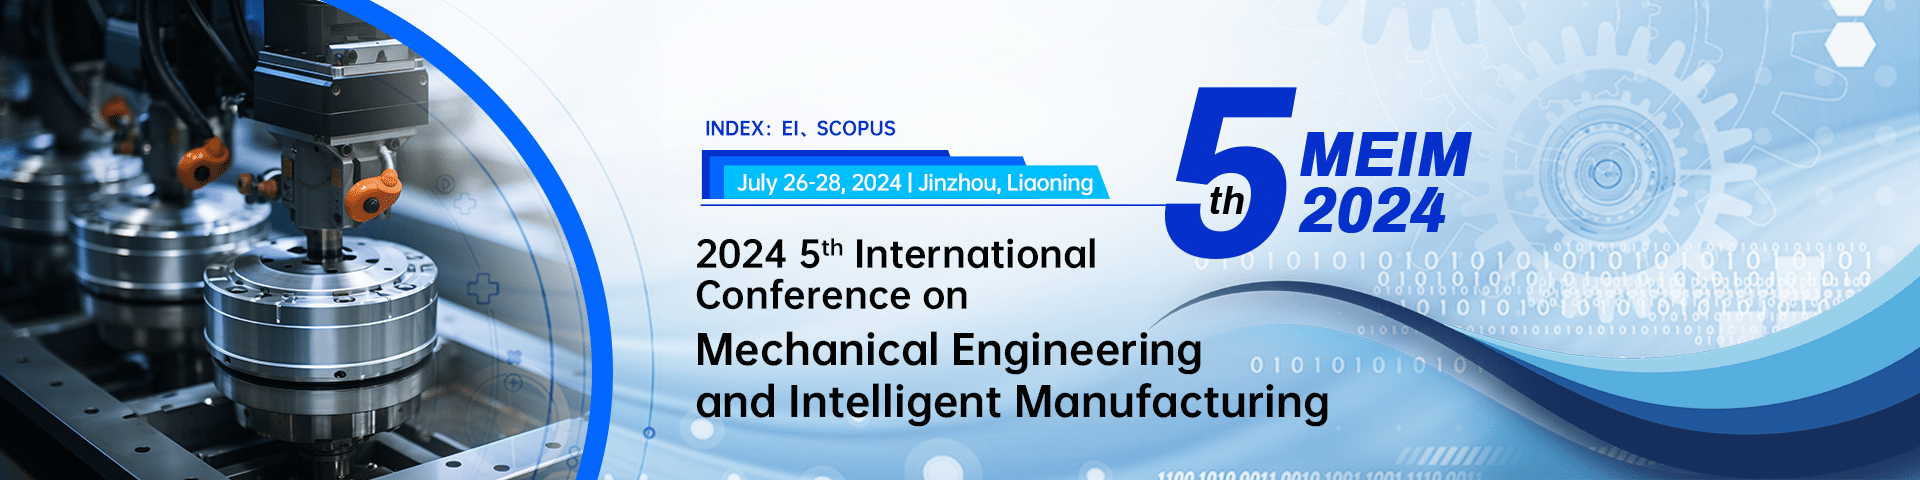 2024 5th International Conference on Mechanical Engineering and Intelligent Manufacturing (MEIM 2024)